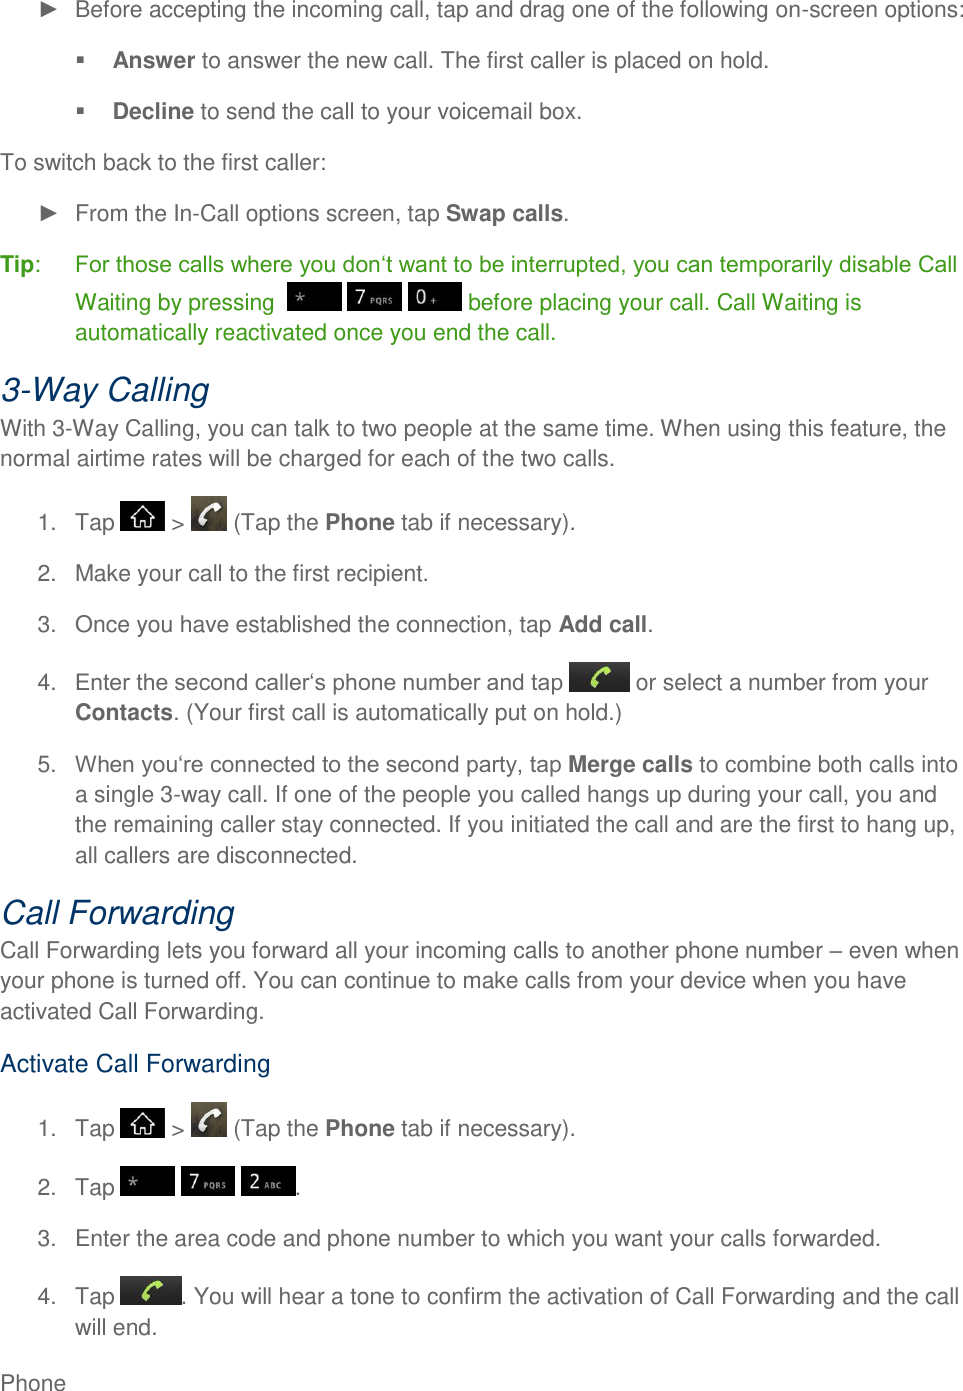 Phone       Before accepting the incoming call, tap and drag one of the following on-screen options:  Answer to answer the new call. The first caller is placed on hold.  Decline to send the call to your voicemail box. To switch back to the first caller:   From the In-Call options screen, tap Swap calls. Tip:  Waiting by pressing        before placing your call. Call Waiting is automatically reactivated once you end the call. 3-Way Calling With 3-Way Calling, you can talk to two people at the same time. When using this feature, the normal airtime rates will be charged for each of the two calls. 1.  Tap   &gt;   (Tap the Phone tab if necessary). 2.  Make your call to the first recipient. 3.  Once you have established the connection, tap Add call. 4.   or select a number from your Contacts. (Your first call is automatically put on hold.) 5. Merge calls to combine both calls into a single 3-way call. If one of the people you called hangs up during your call, you and the remaining caller stay connected. If you initiated the call and are the first to hang up, all callers are disconnected. Call Forwarding Call Forwarding lets you forward all your incoming calls to another phone number  even when your phone is turned off. You can continue to make calls from your device when you have activated Call Forwarding. Activate Call Forwarding 1.  Tap   &gt;   (Tap the Phone tab if necessary). 2.  Tap      . 3.  Enter the area code and phone number to which you want your calls forwarded. 4.  Tap  . You will hear a tone to confirm the activation of Call Forwarding and the call will end. 